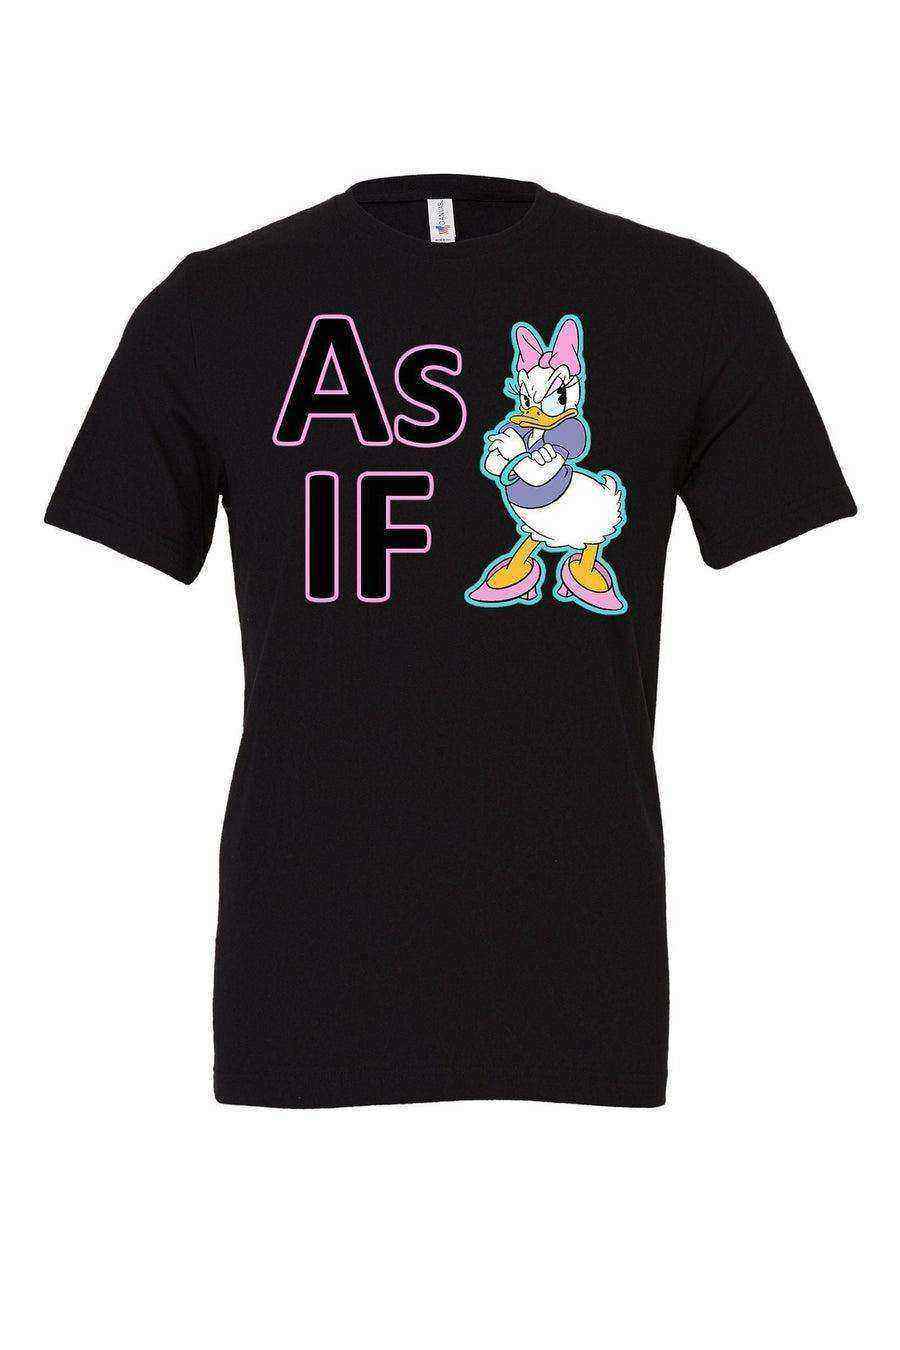 Womens | As If Sassy Daisy Duck Shirt - Dylan's Tees